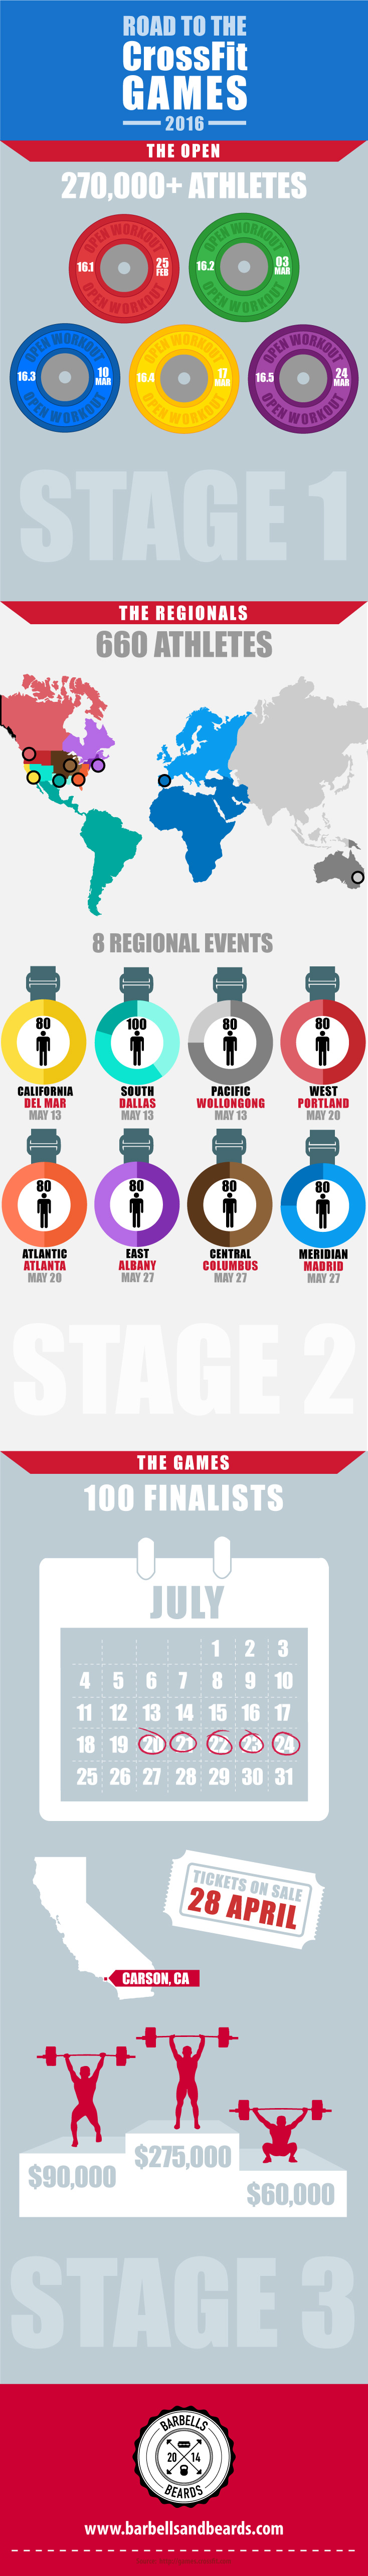 Road to the CrossFit Games 2016 Infographic